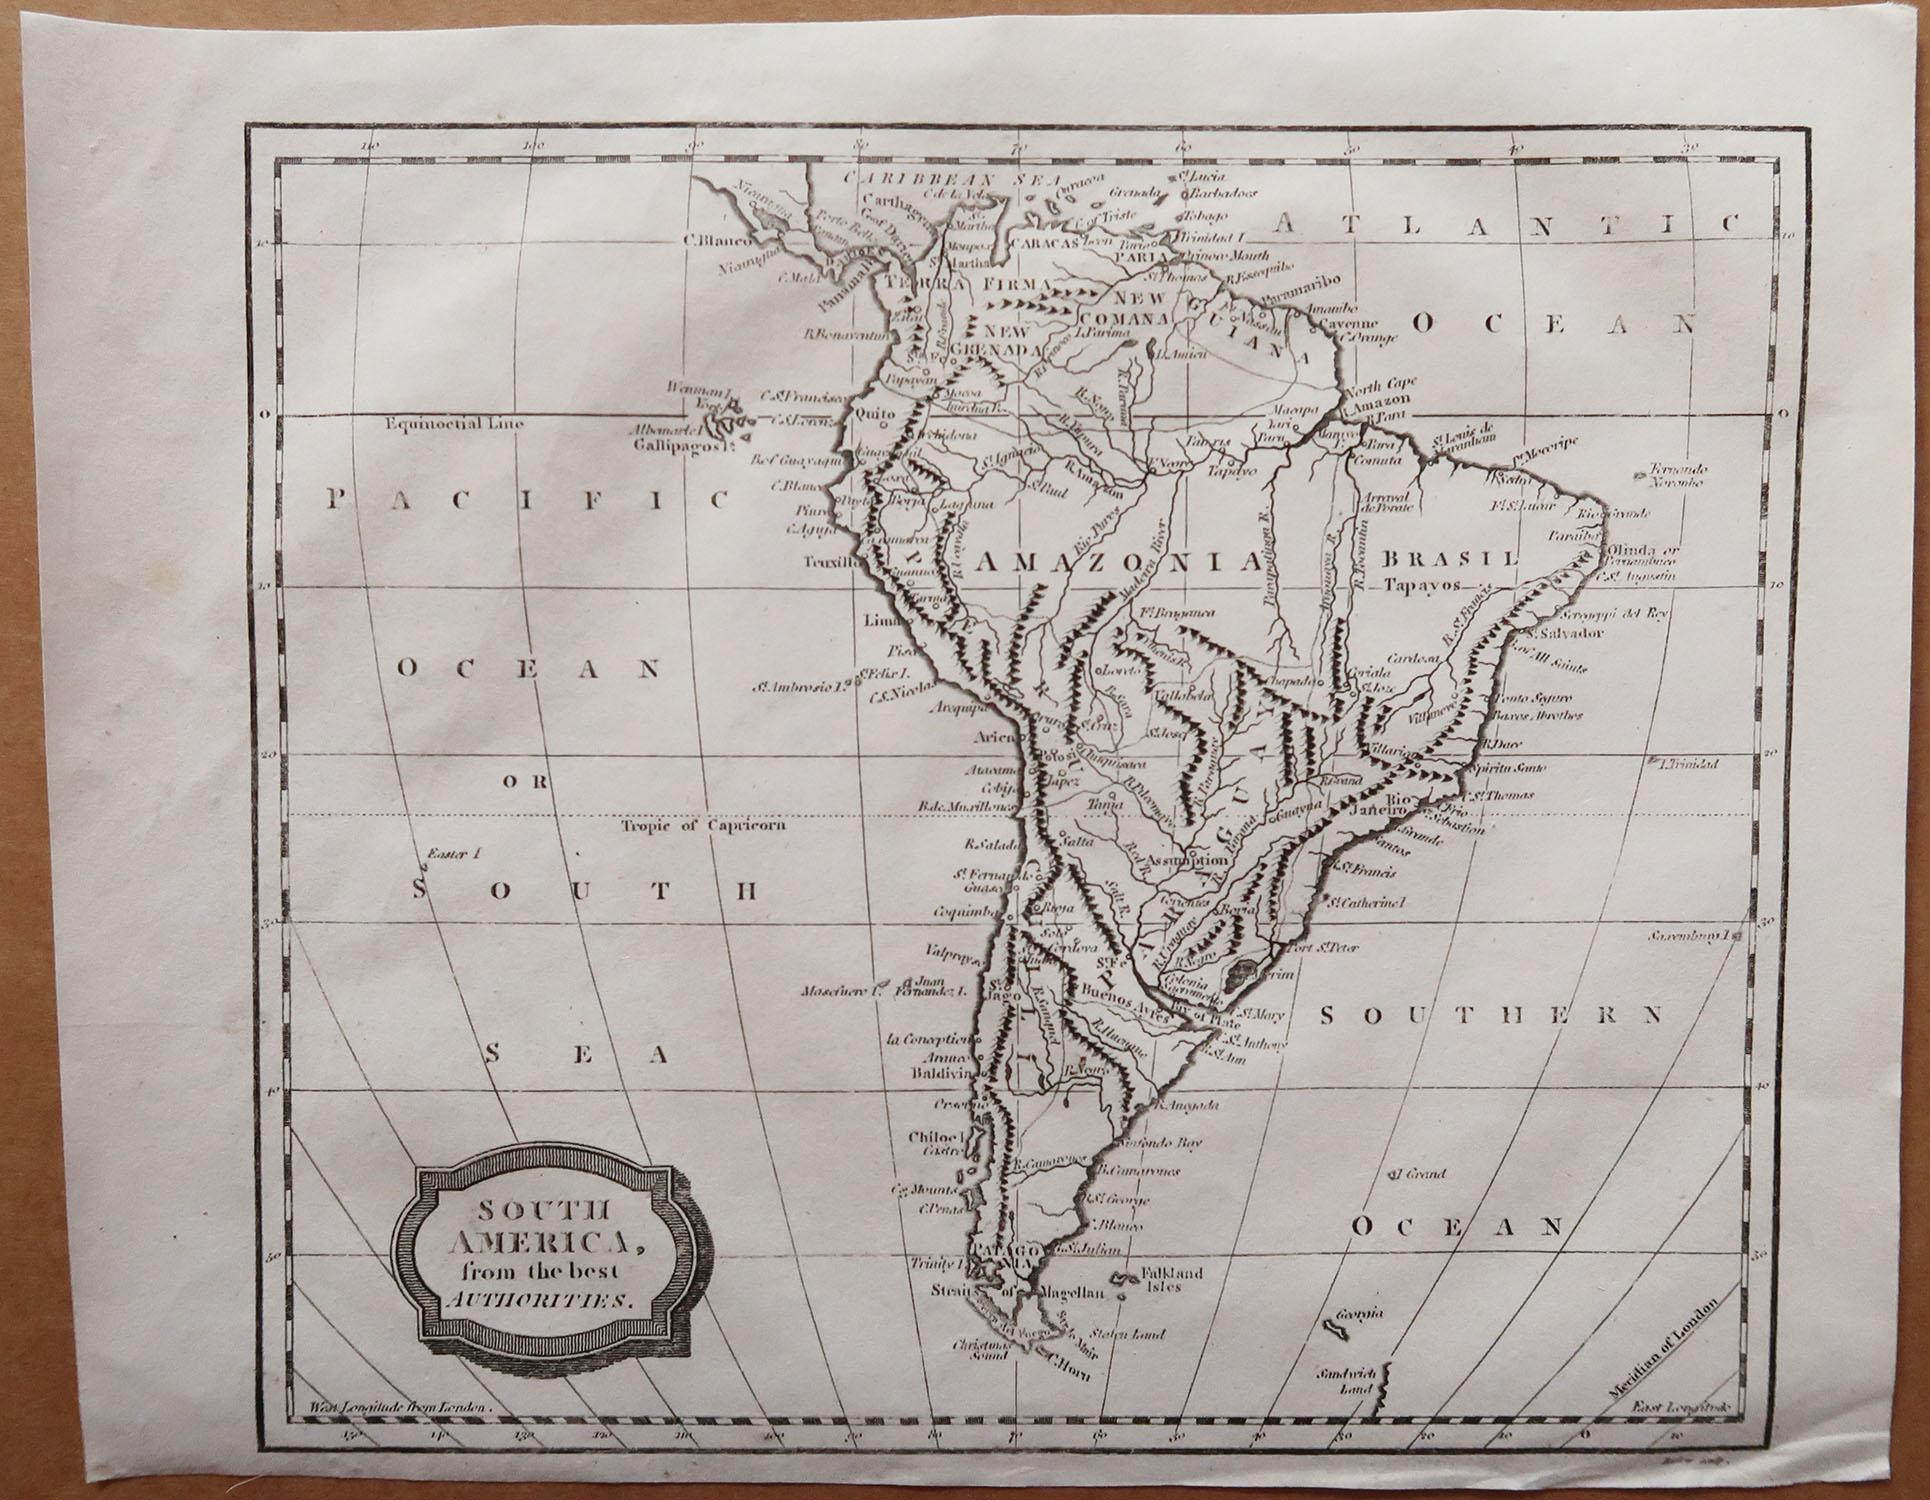 Other Original Antique Map of South America, Engraved by Barlow, 1806